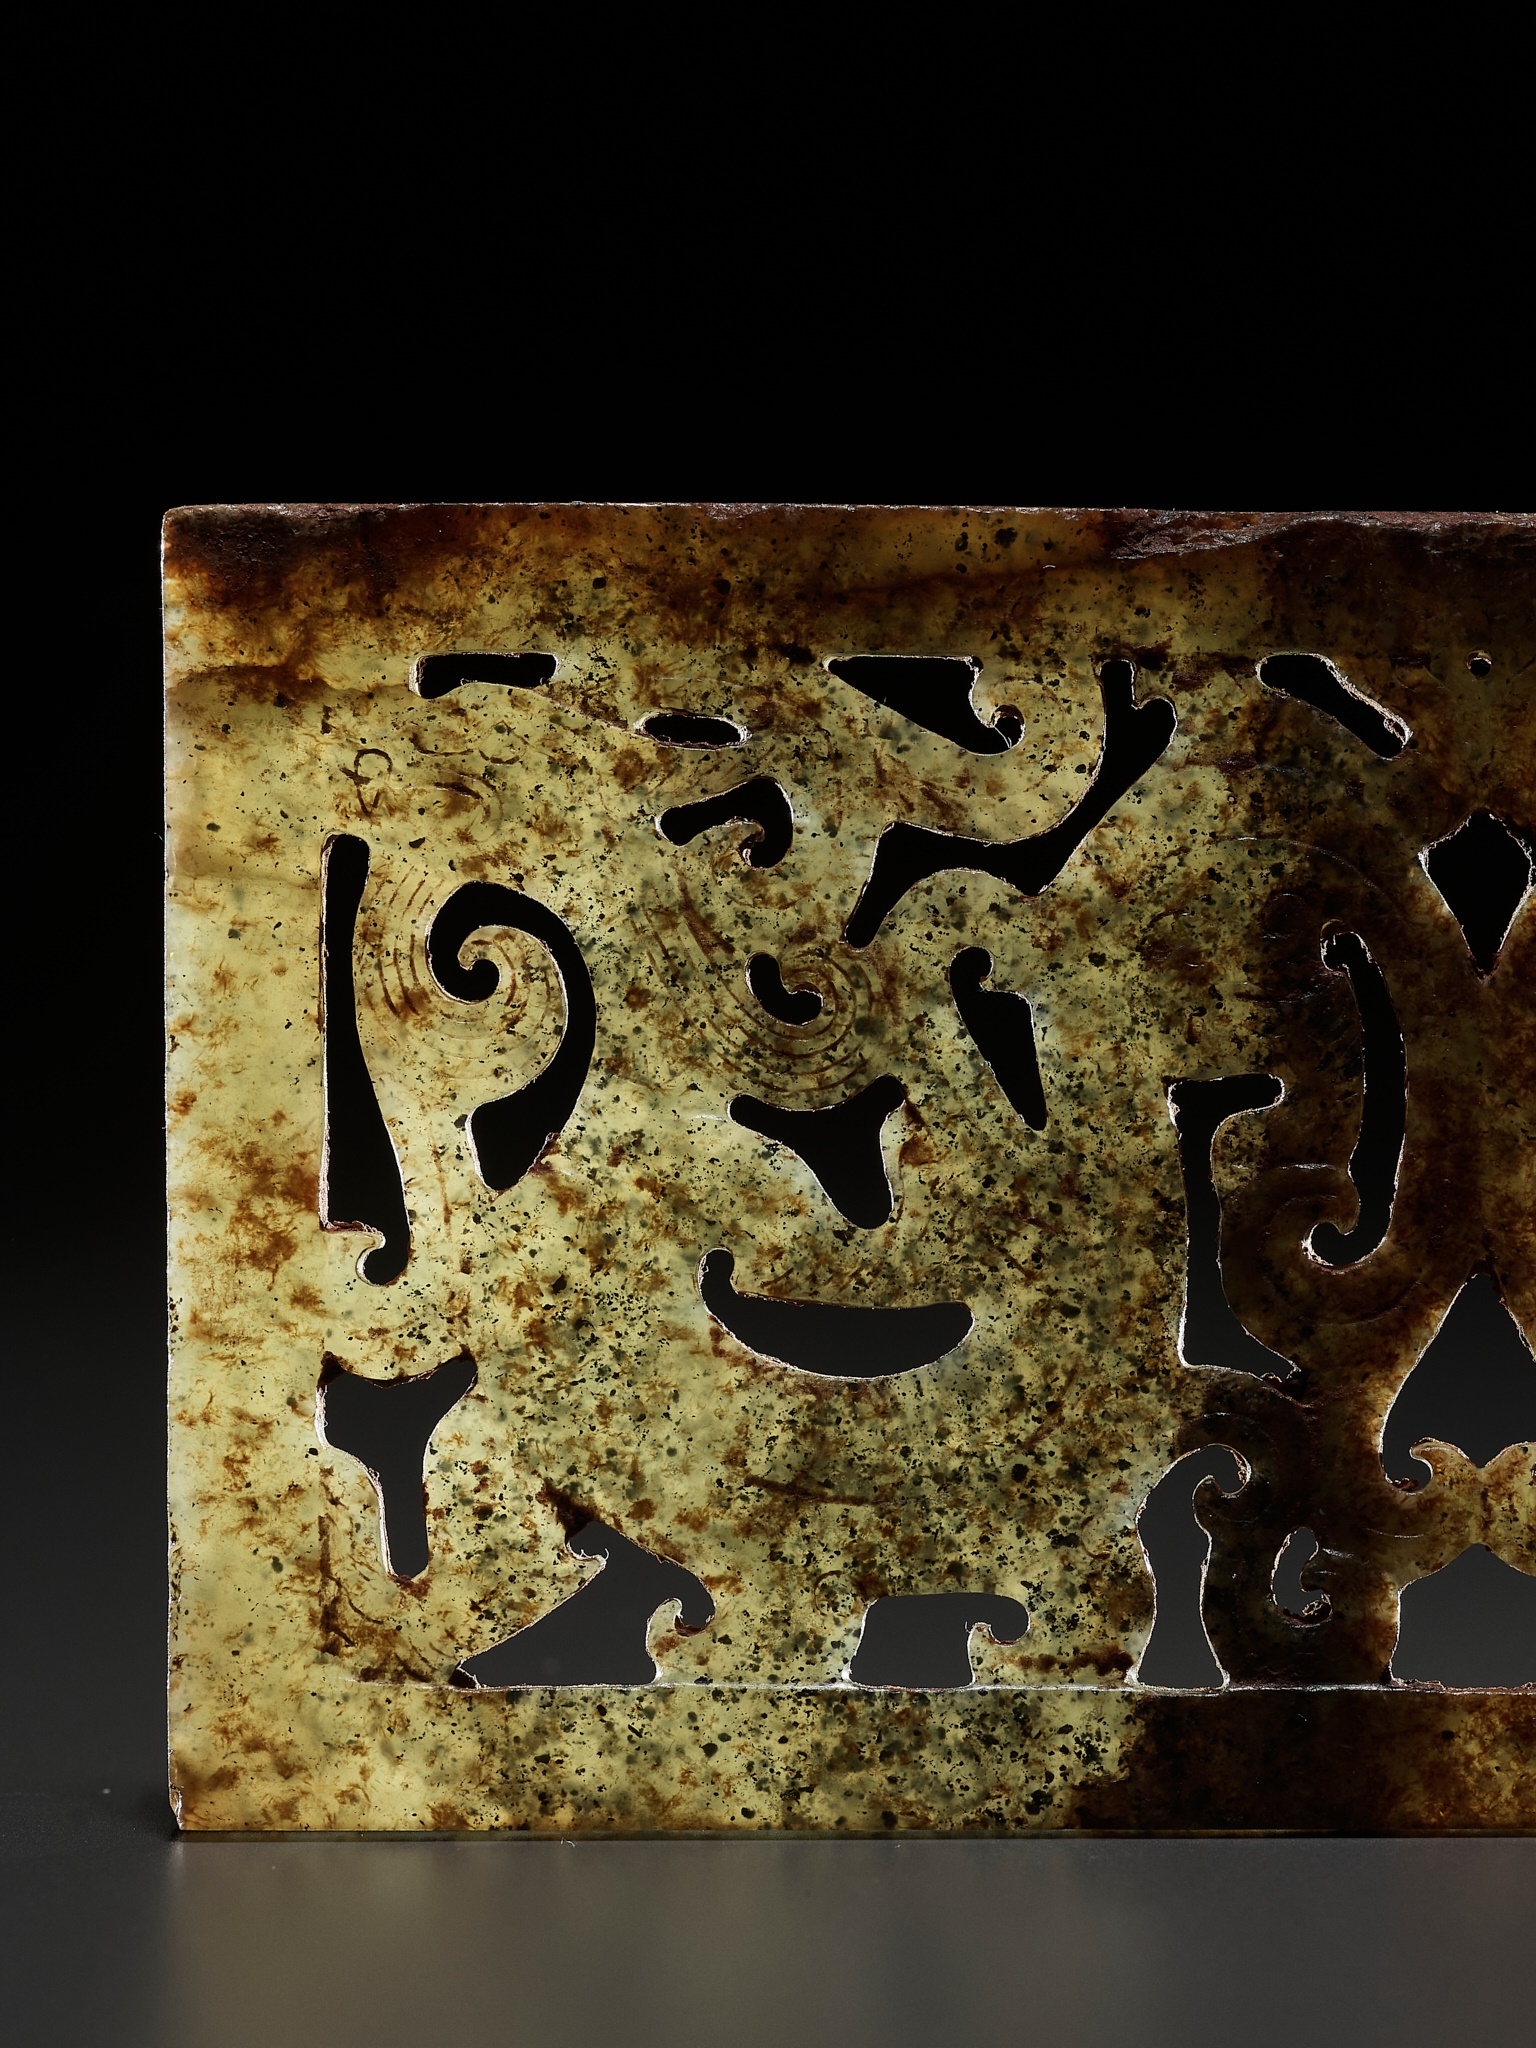 A RECTANGULAR GREEN JADE 'DOUBLE DRAGON' PLAQUE, LATE WARRING STATES PERIOD TO EARLY WESTERN HAN DYN - Image 7 of 12